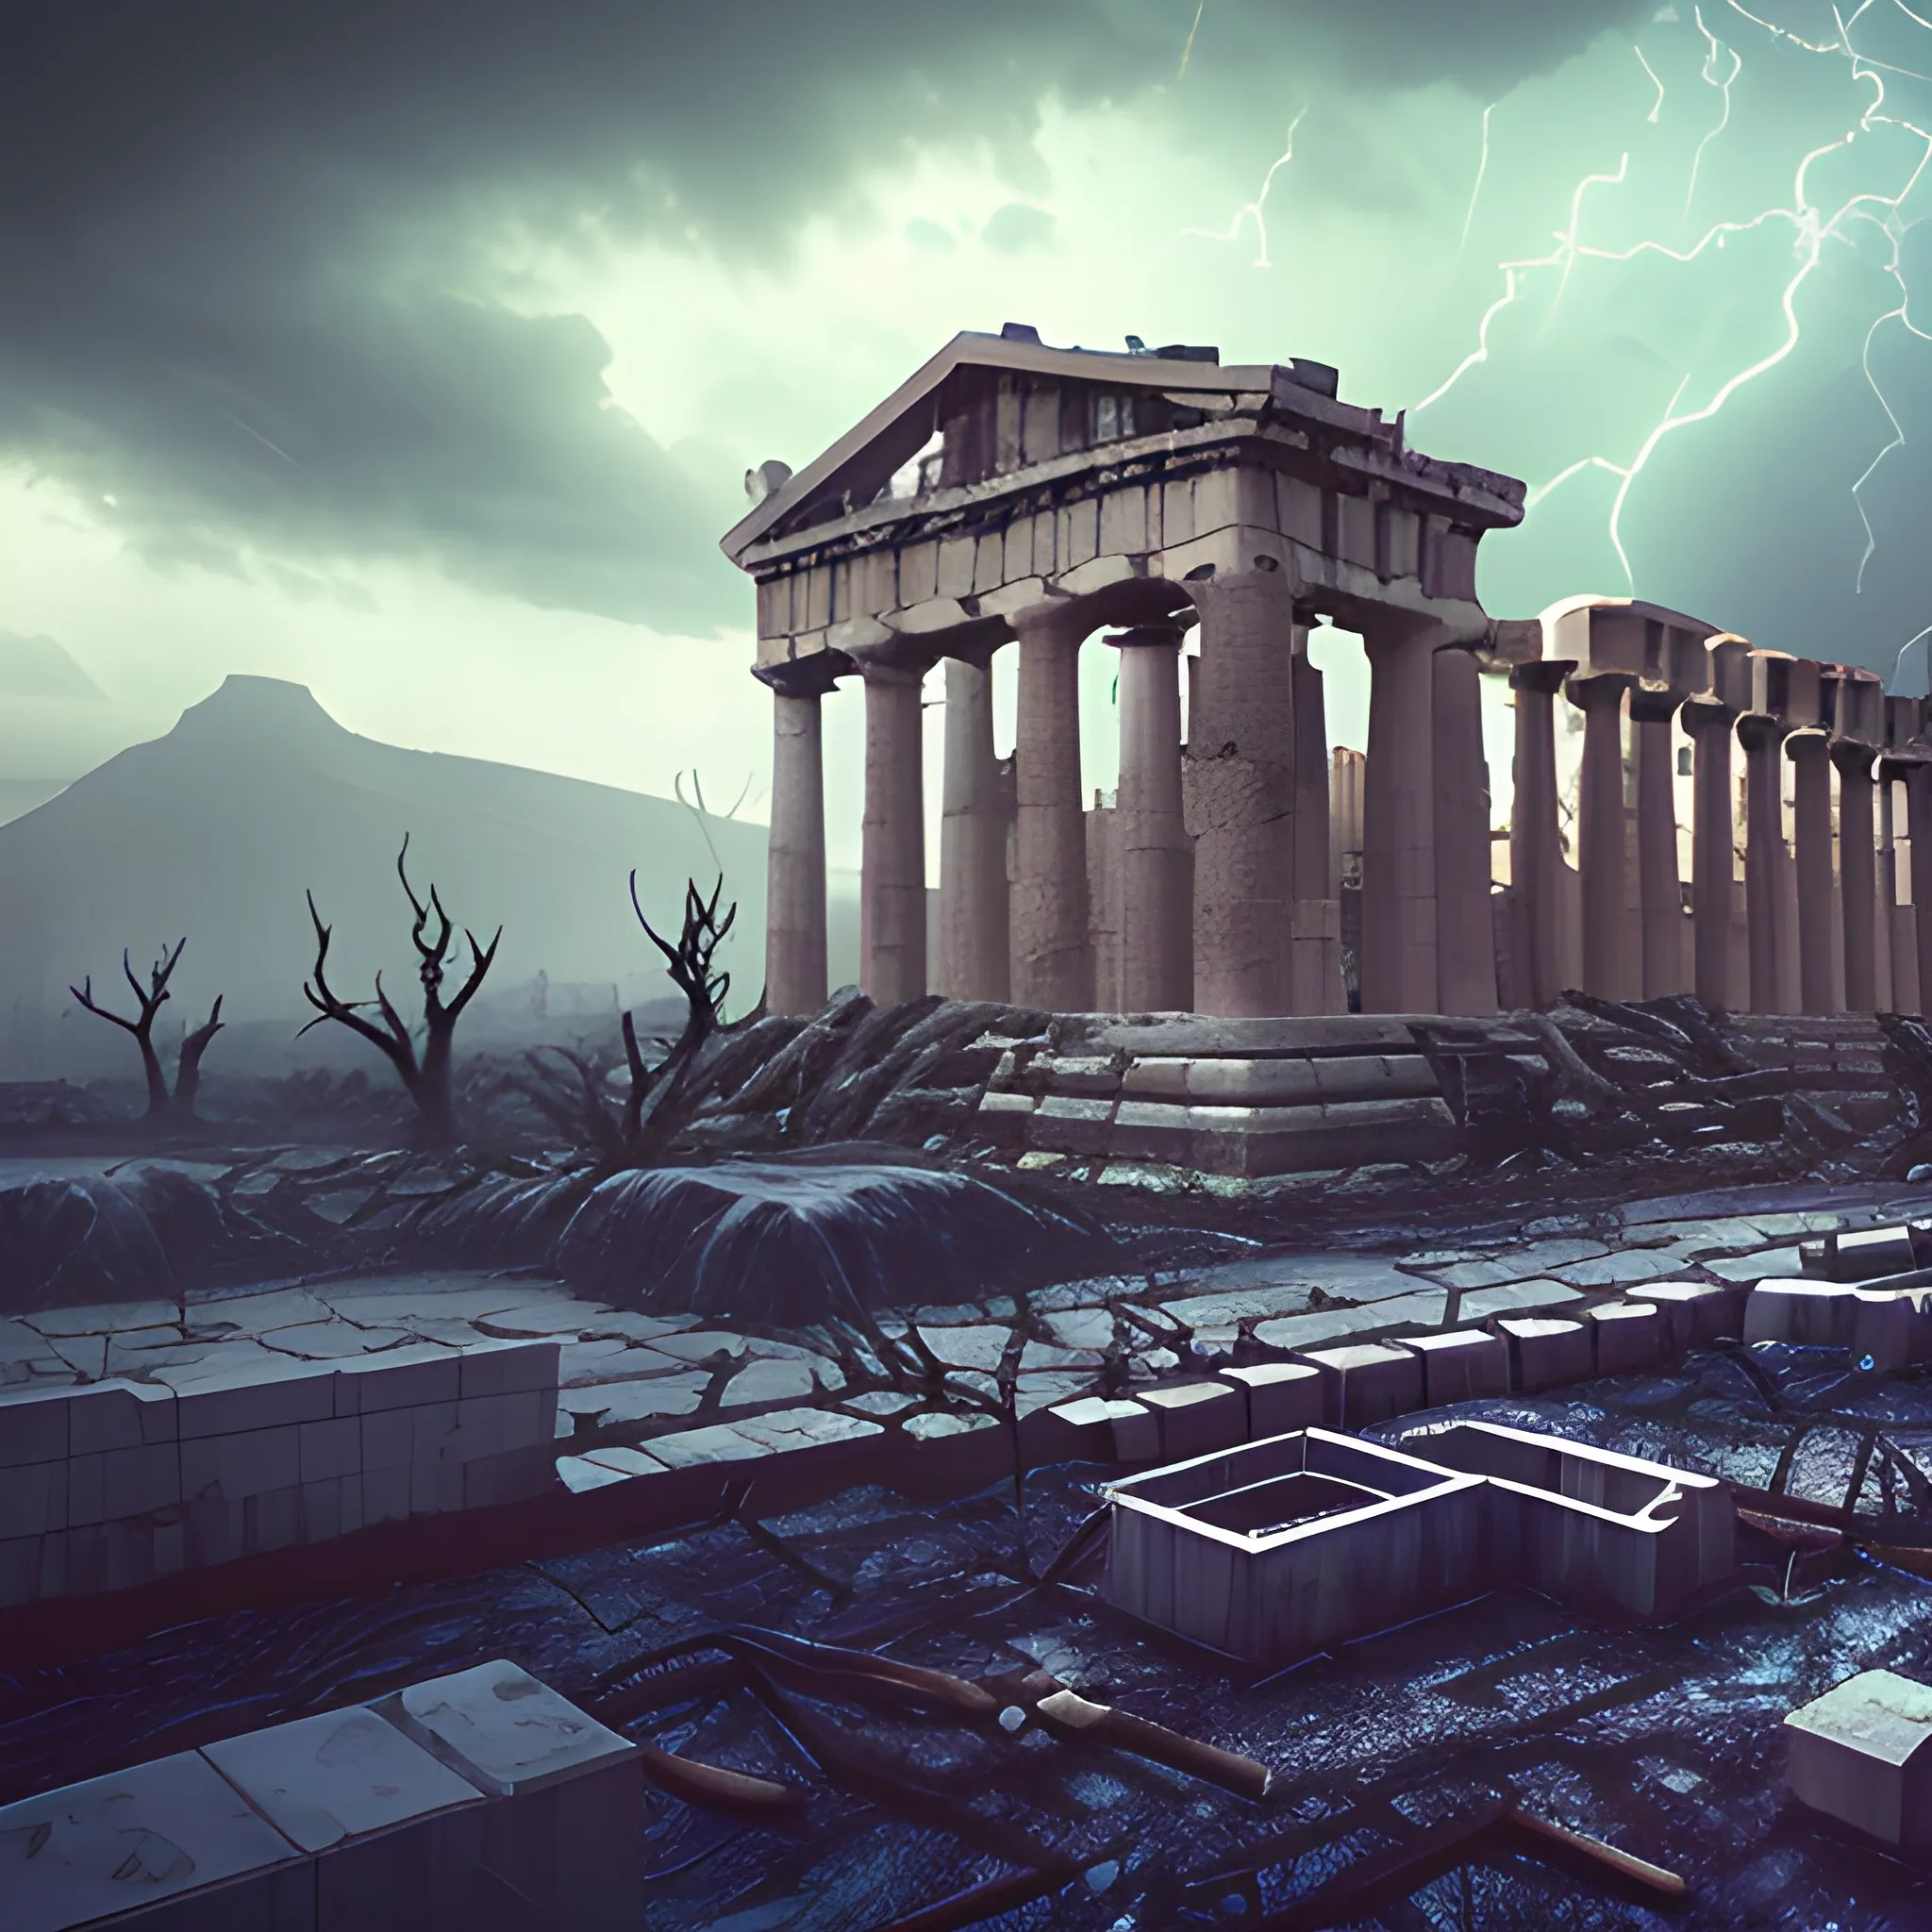 city of acropolis, on a high mountain, destroyed city, surrounded by clouds, dark environment, place of terror, dim lights, destruction, rot, night, darkness, dead vegetation, moor, rotten fauna, dry trees, burned grass, dead grass, barren plants, burned trees, rain, rainy weather, storm, strong storm, wind raising sand, rainy environment, thunder, lightning, dim lights, water falling from the sky, terror, dark moon, darkness, ruins, destroyed, death, details ancient greece architecture, detailed environment, hyper realistic, destroyed city, decay, rot, 8k details, wide angle, 3d, panoramic view, slasher style